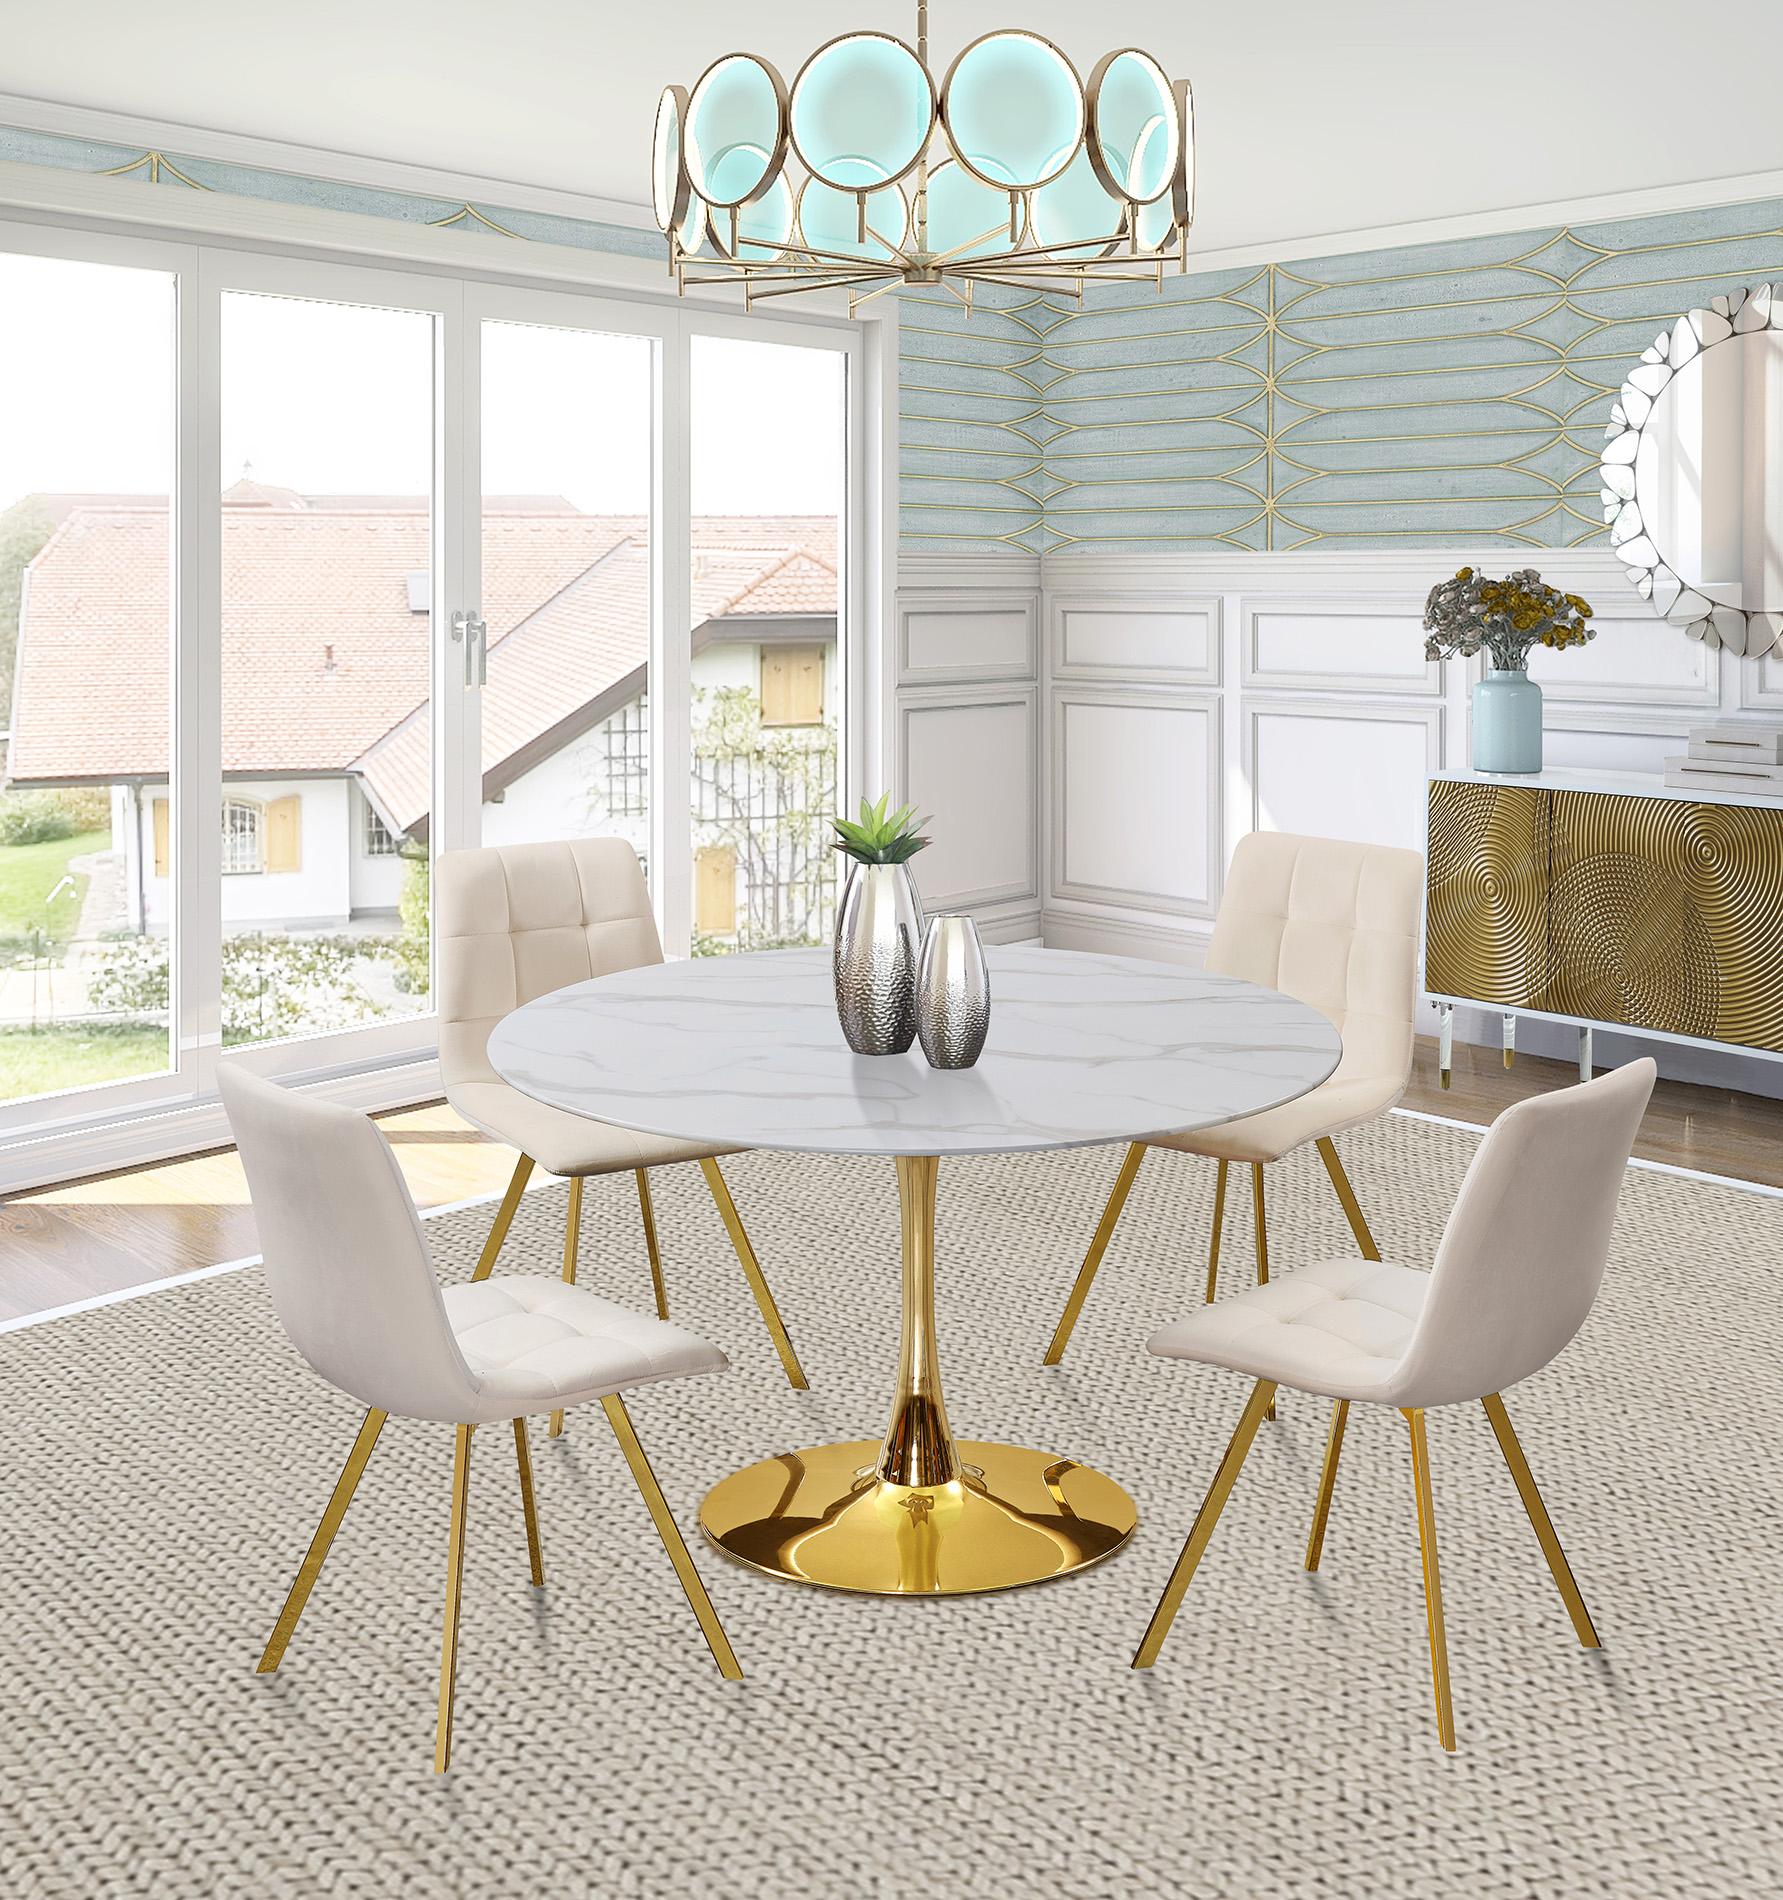 Contemporary, Modern Dining Table Set TULIP & ANNIE 975-T 975-T-Set-5 in Cream, White, Gold Fabric